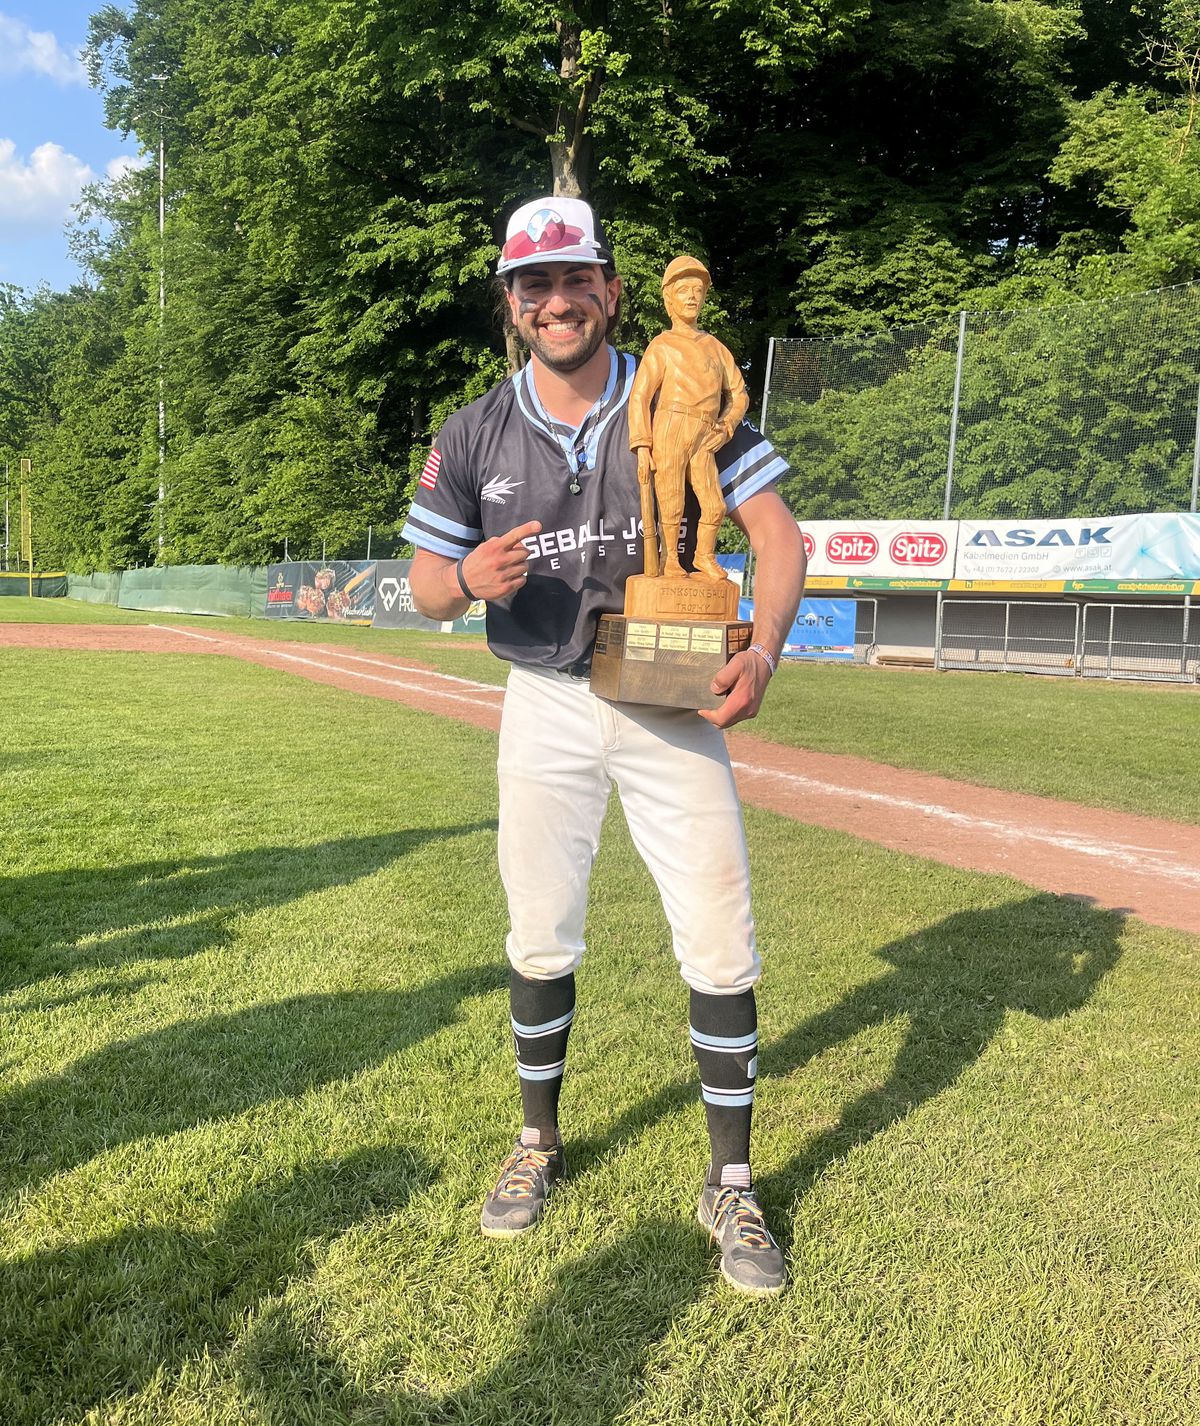 Bryan Ruby proudly holds the trophy after helping the BBJO Globetrotters win Austria’s Finkstonball International Tournament championship.